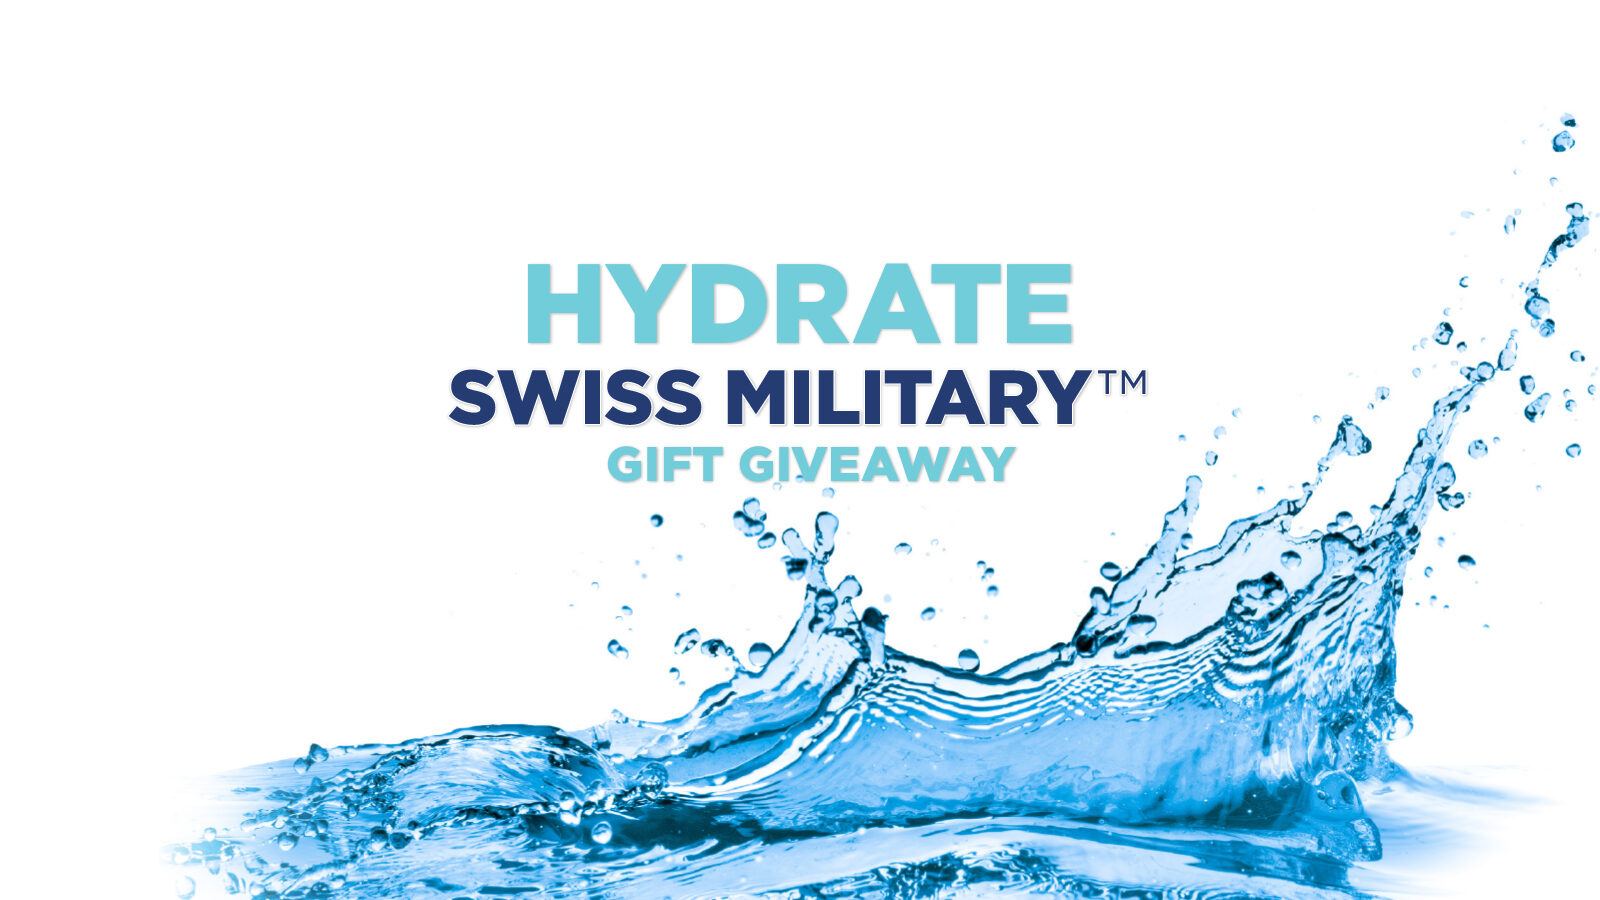 Hydrate Swiss Military™ Gift Giveaway